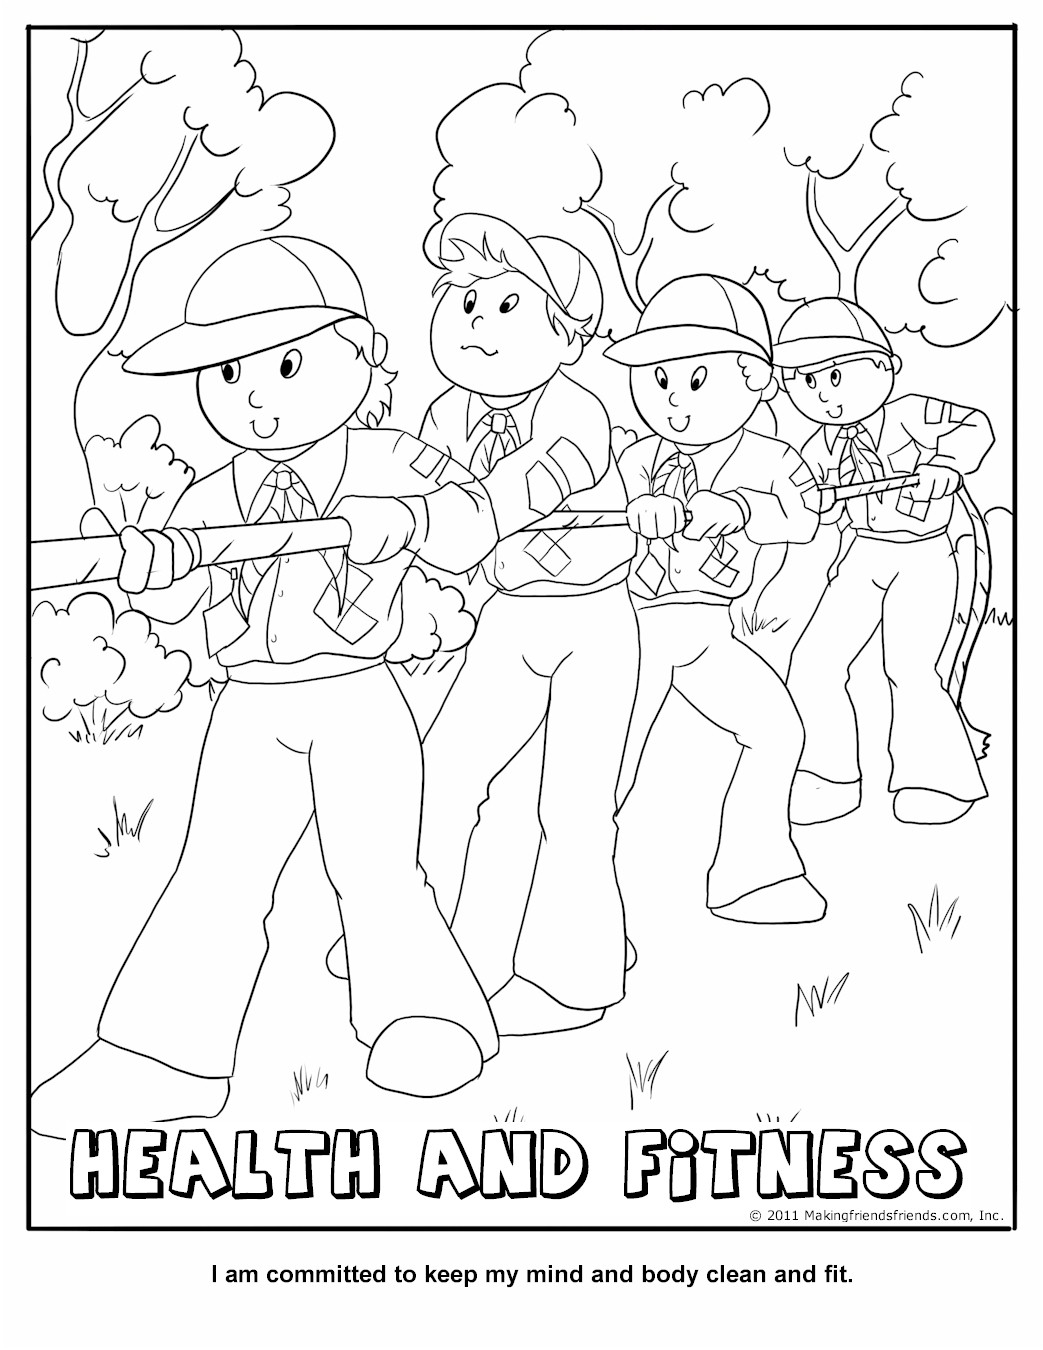 Responsibility Coloring Pages at GetColorings.com | Free printable